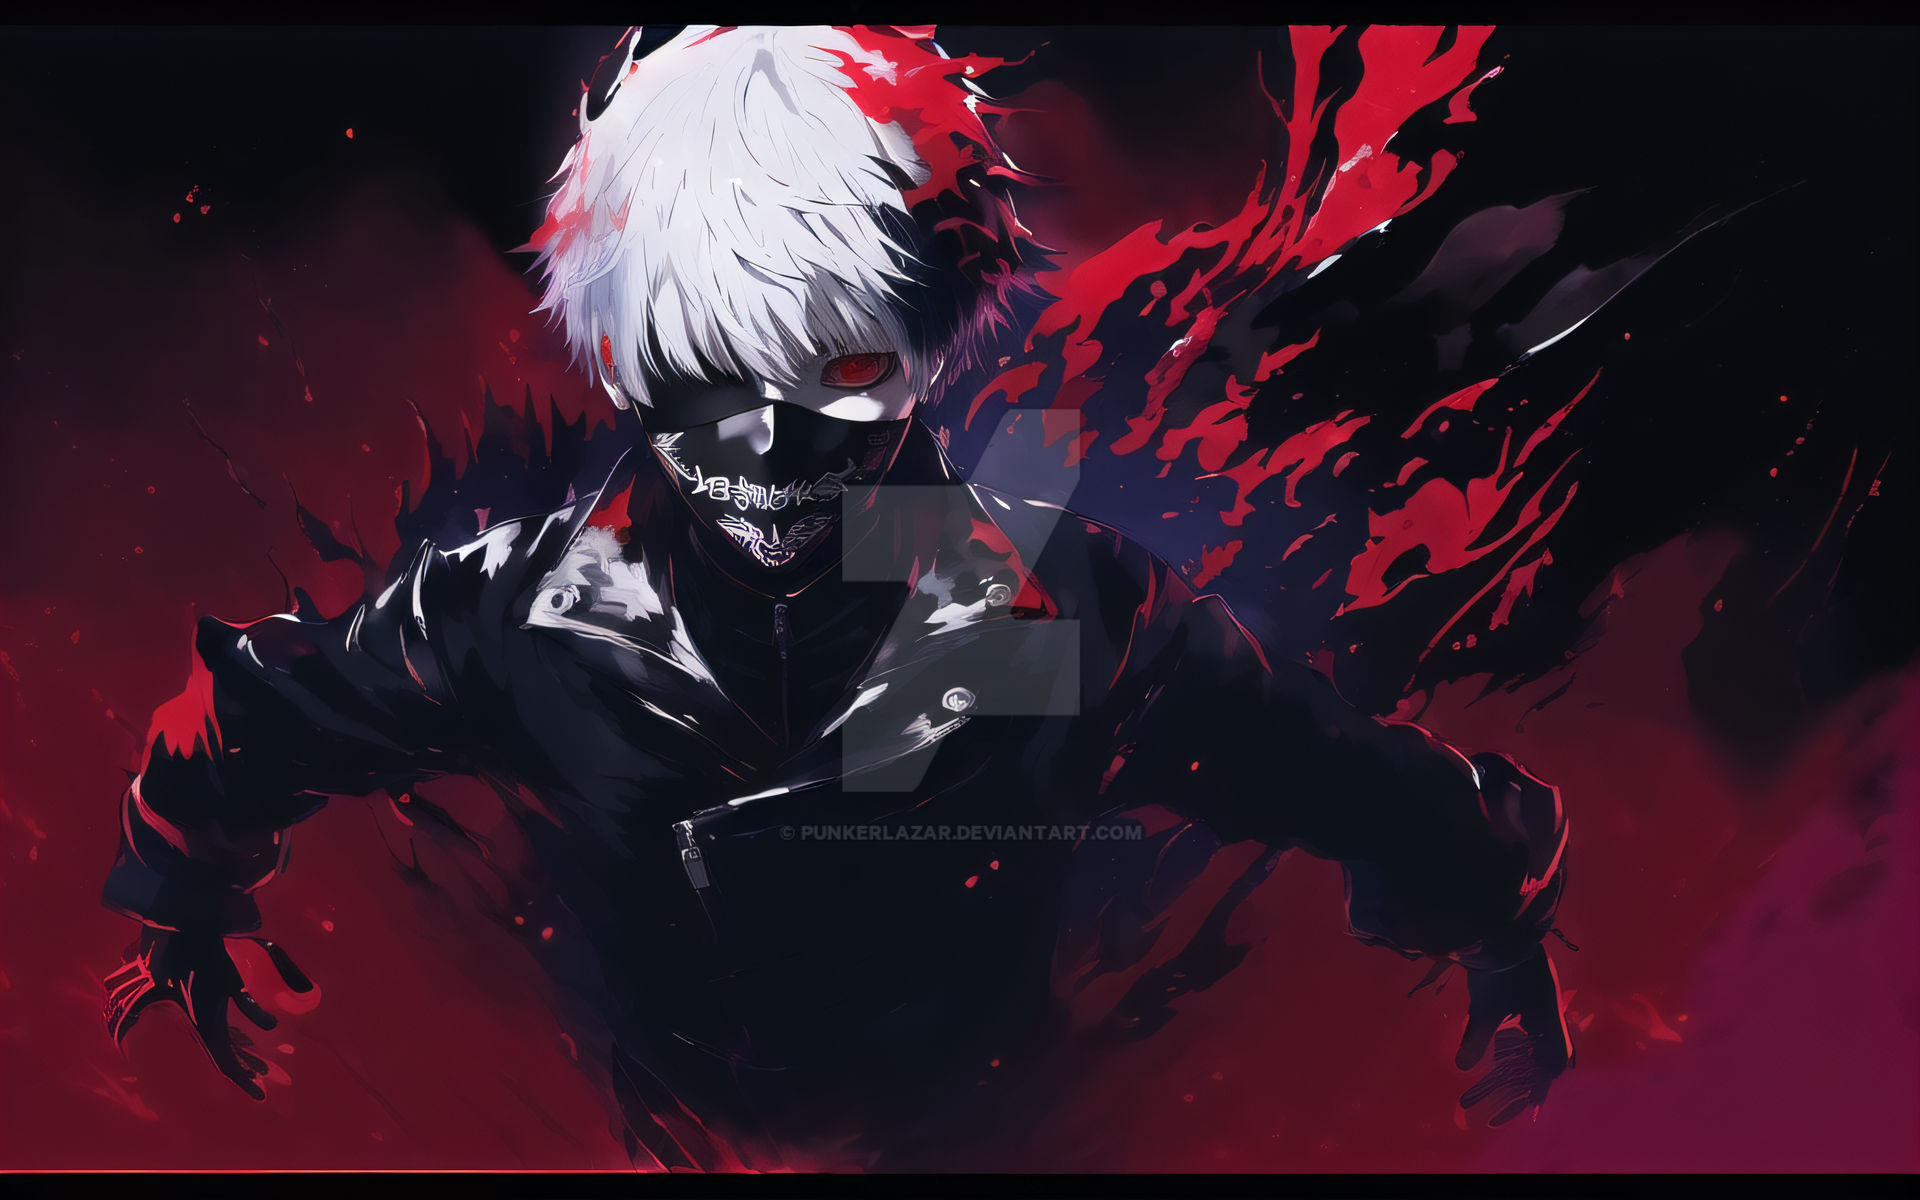 TOKYO GHOUL - Standard Edition [PC Download]